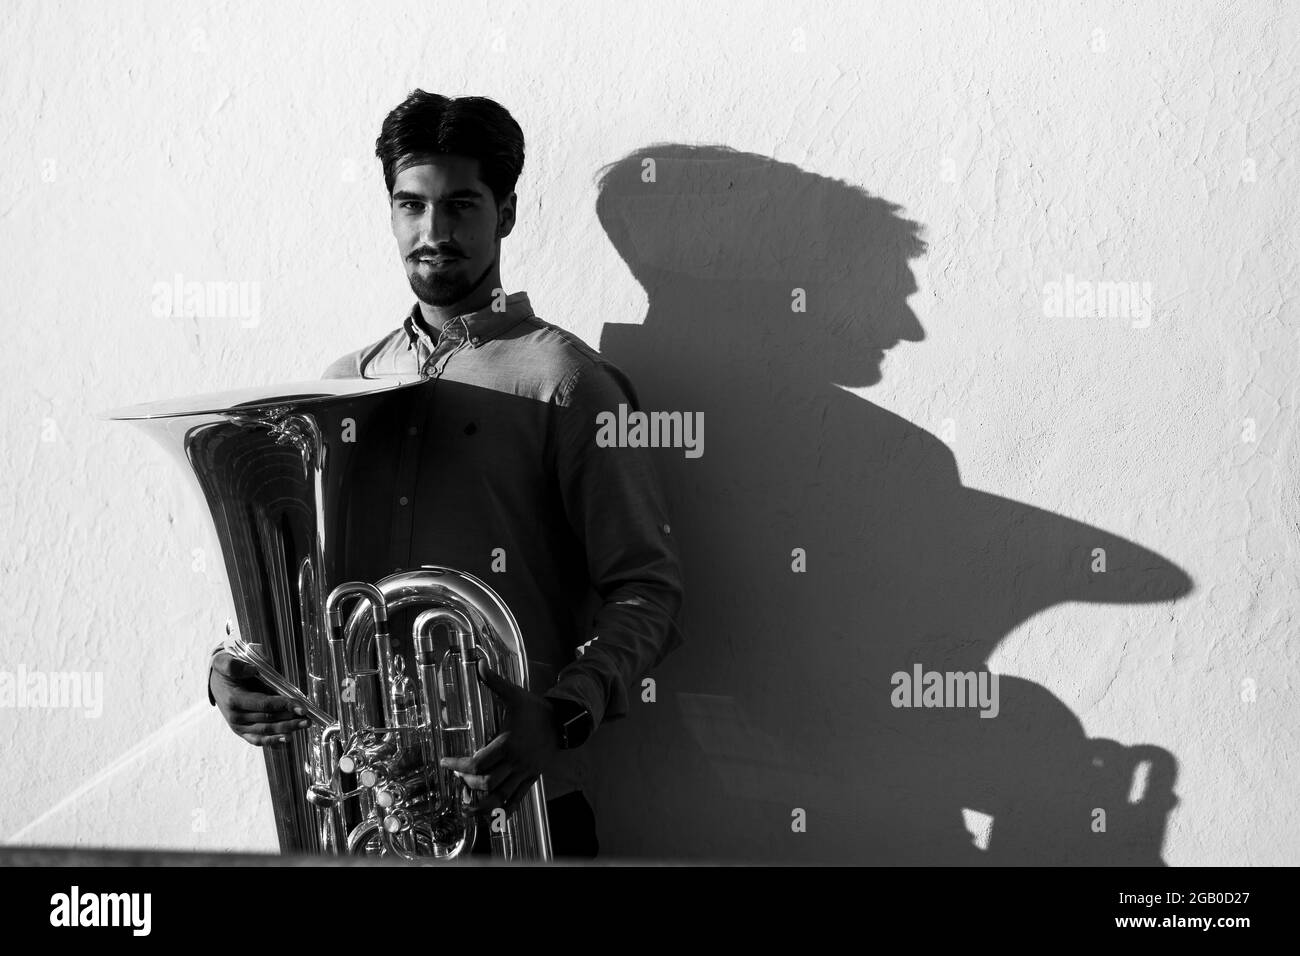 A musician with a tuba near the wall. Black and white photo. Stock Photo